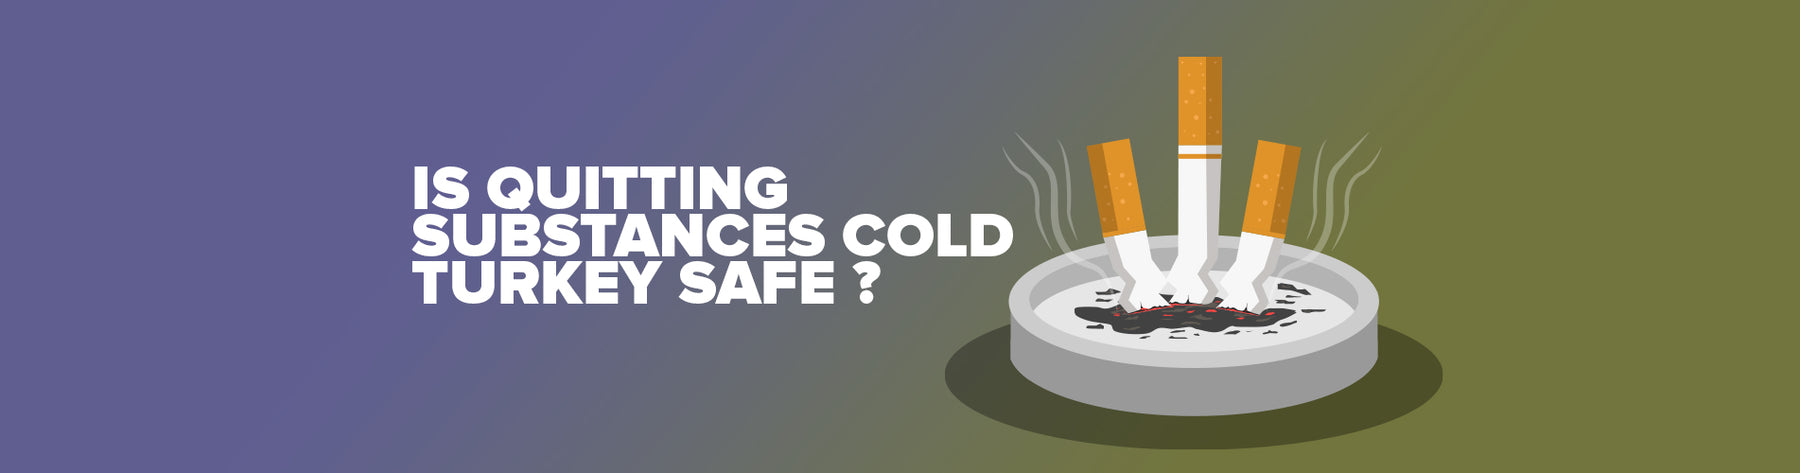 Is Quitting Substances Cold Turkey Safe?